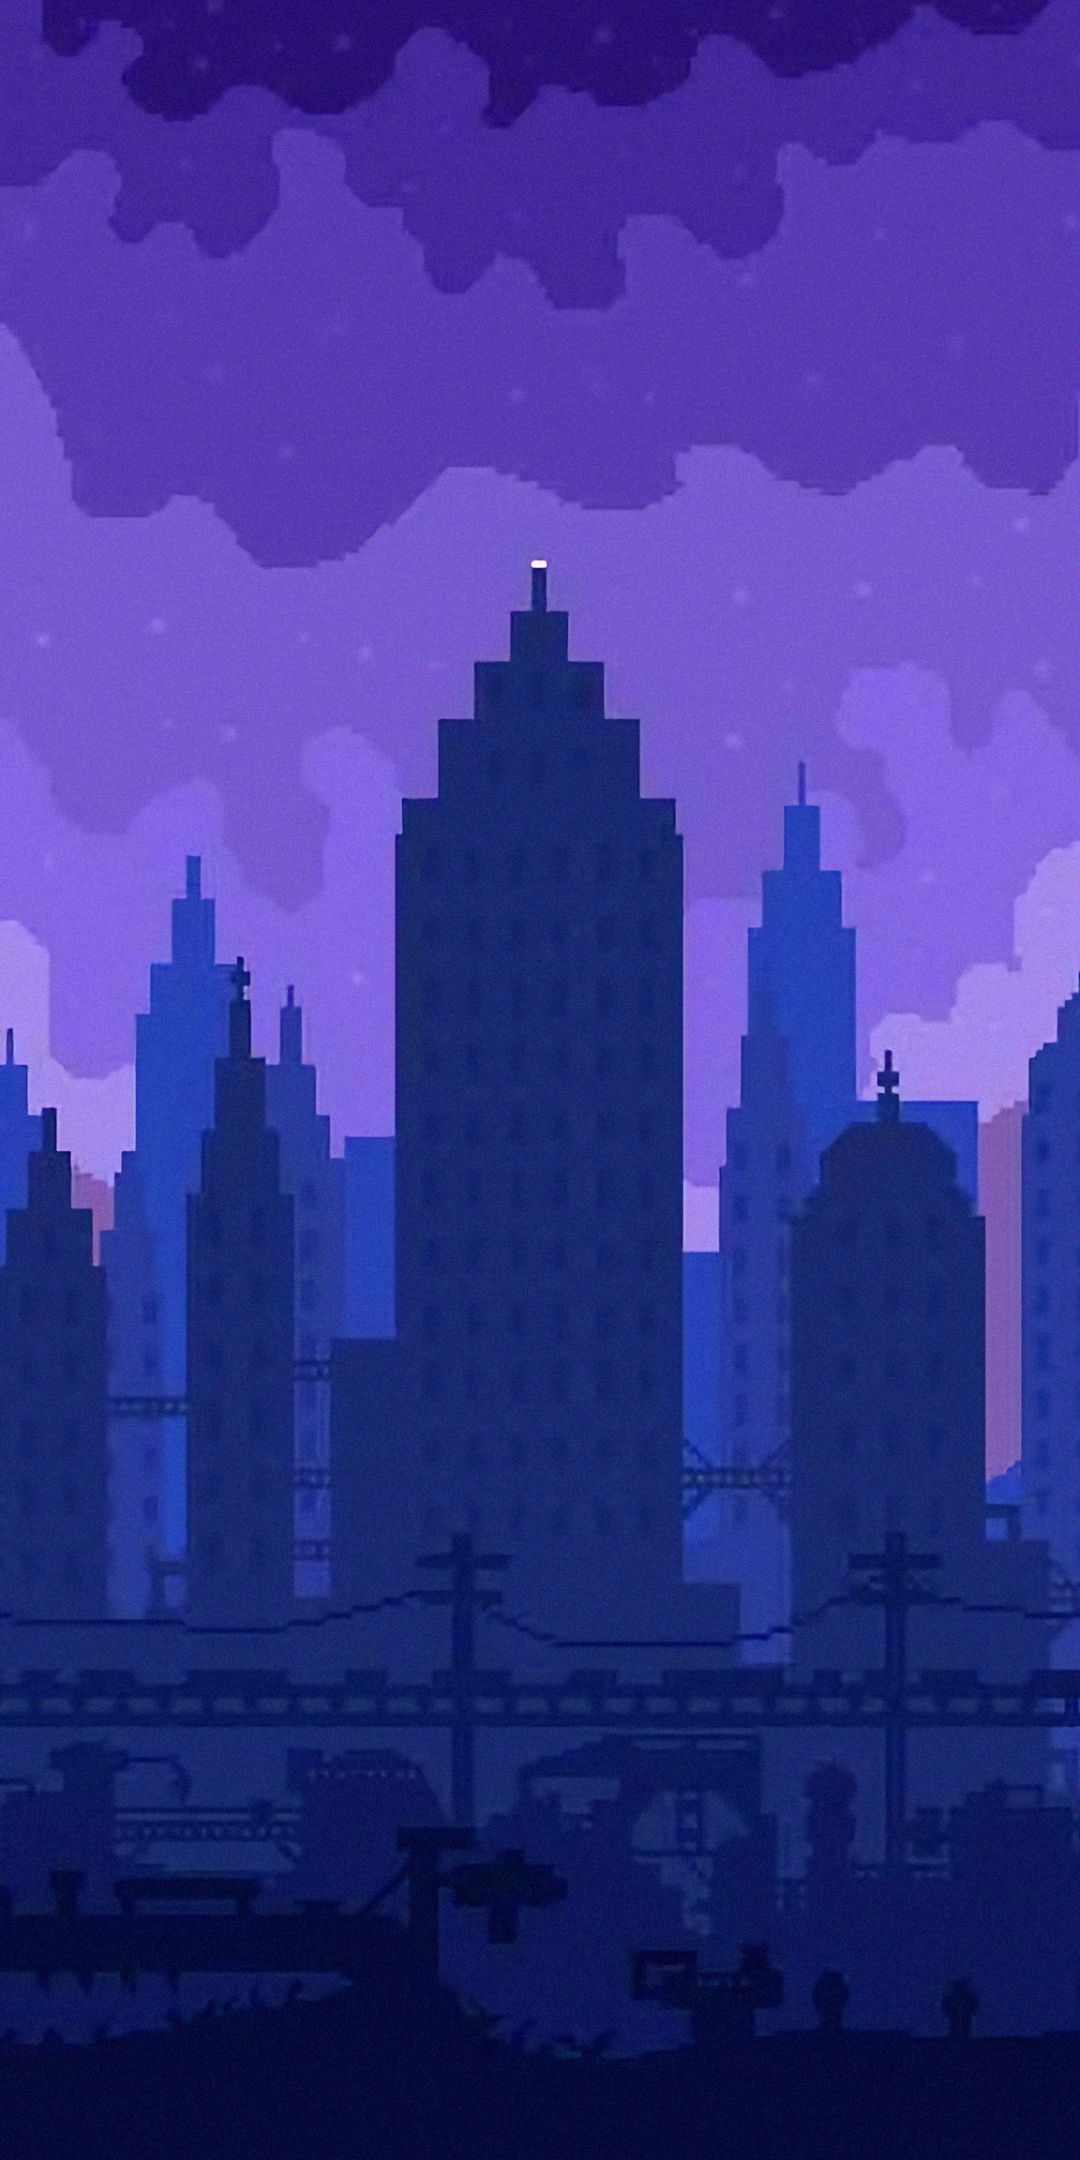 High skies, buildings, silhouette, cityscape, pixel art wallpaper. Cityscape wallpaper, Cool pixel art, Pixel art background